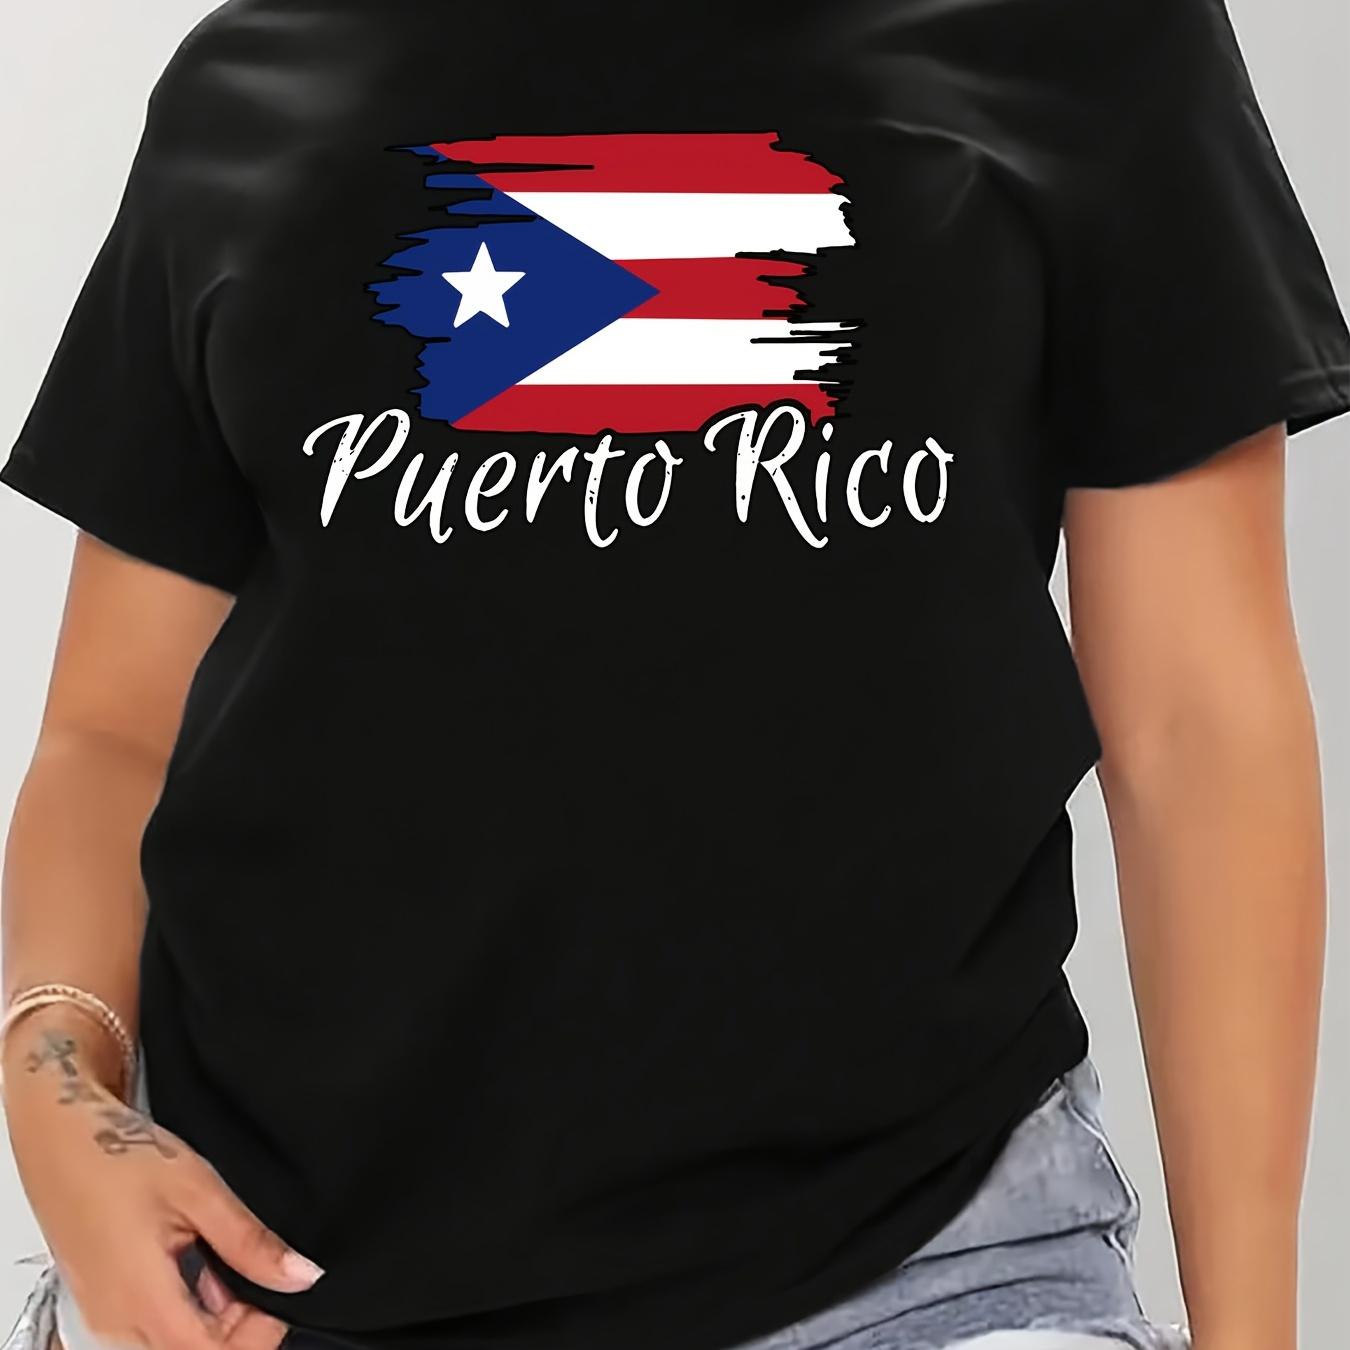 

Women's Plus Size Casual Sporty T-shirt, Puerto Rico Flag Print, Comfort Fit Short Sleeve Tee, Fashion Breathable Casual Top